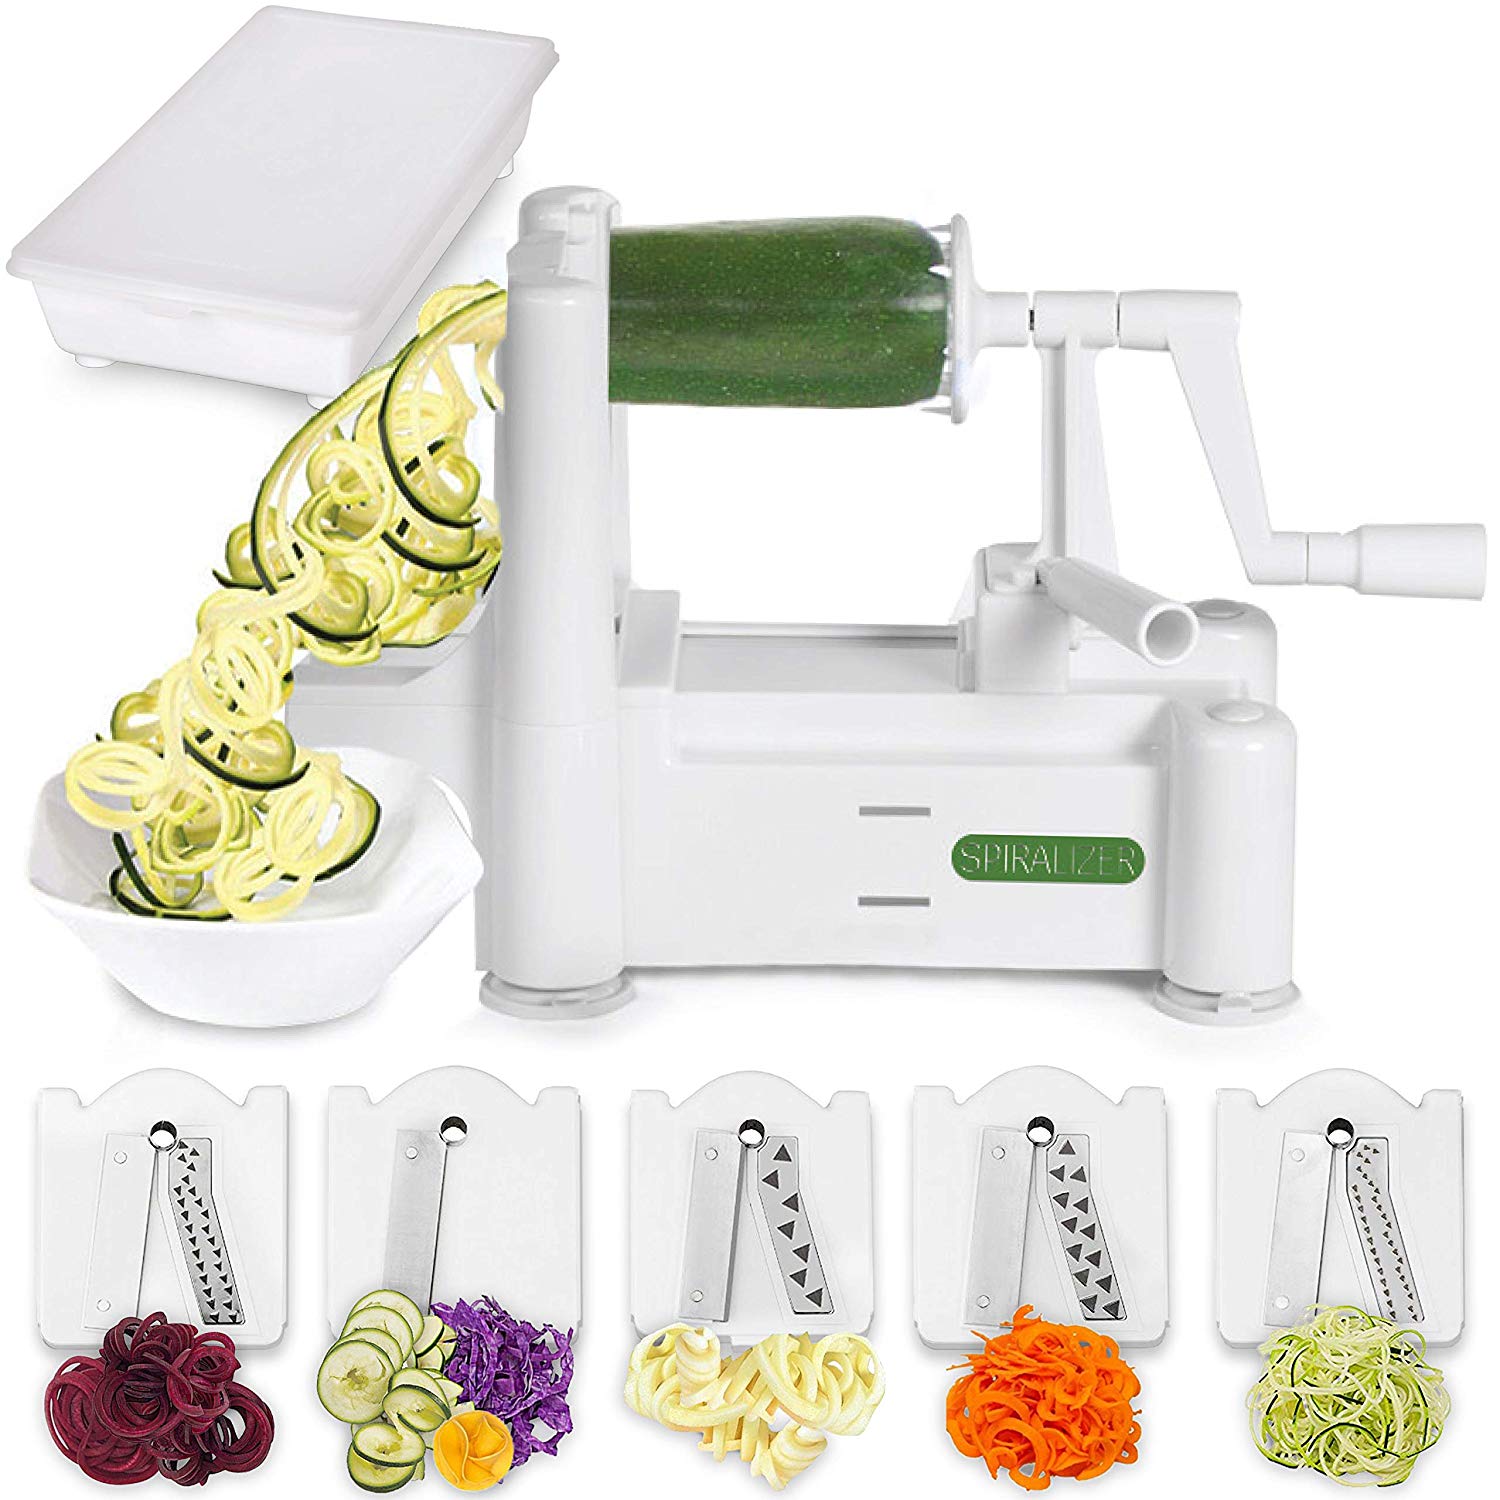 Ready Nutrition - Try this spiralizer as a great gift for the health conscious!